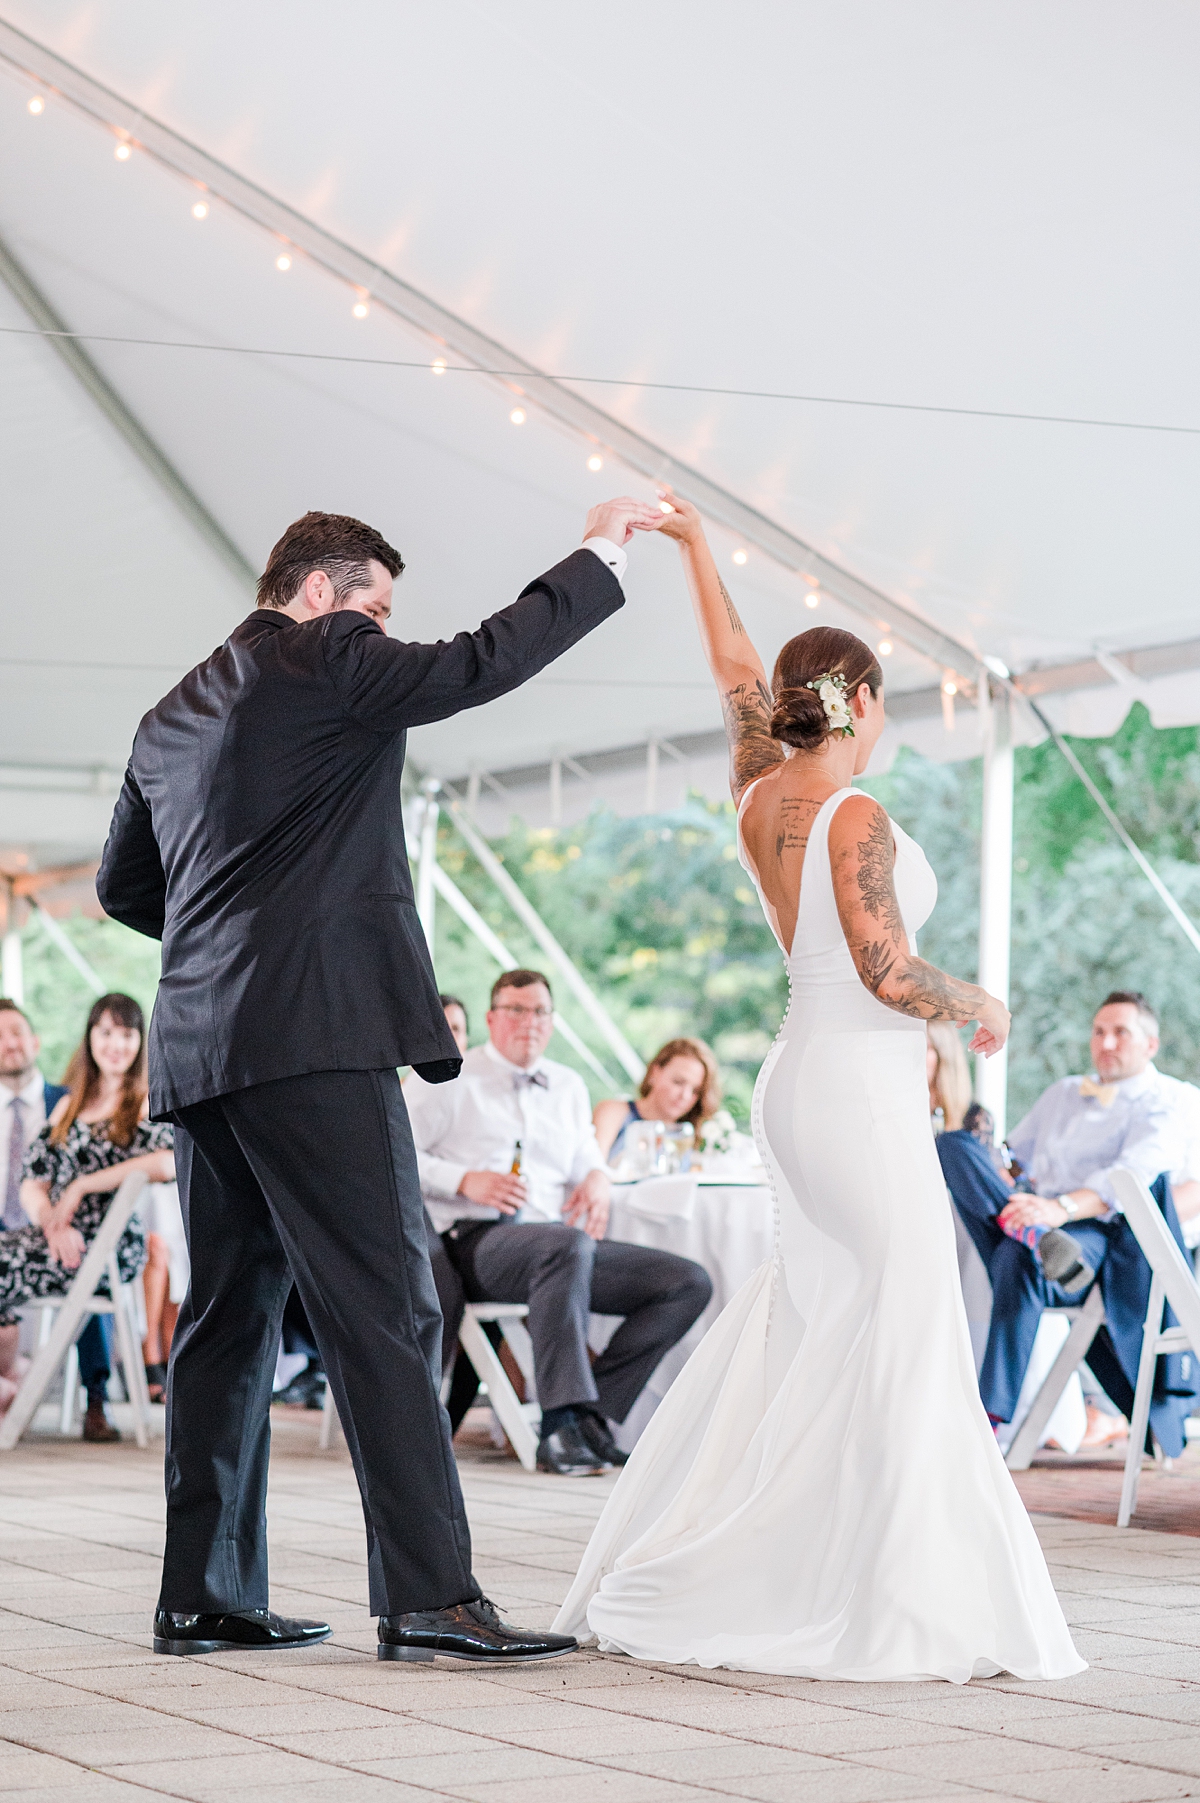 Bride and Groom First Dance During Lewis Ginter Botanical Garden Wedding Reception. Wedding Photography by Virginia Wedding Photographer Kailey Brianne Photography. 